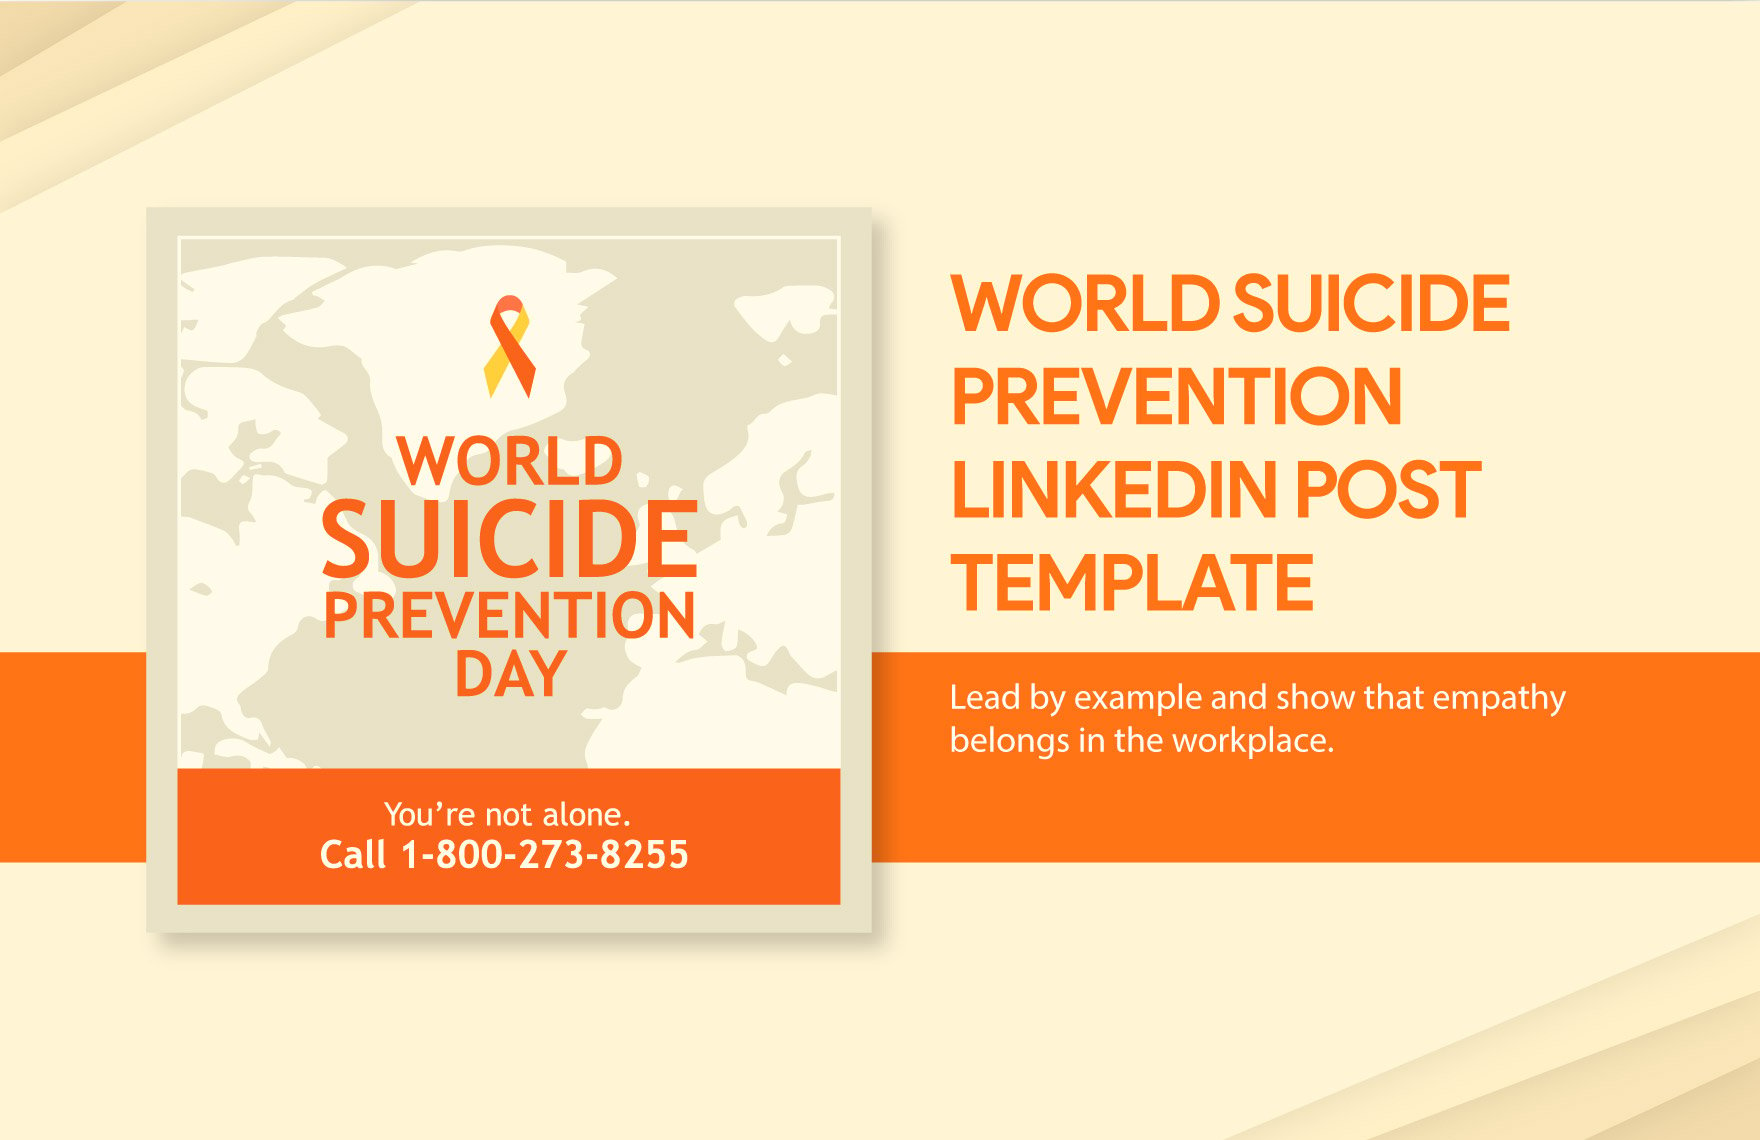 Free World Suicide Prevention Day LinkedIn Post Template in Illustrator, PSD, PNG